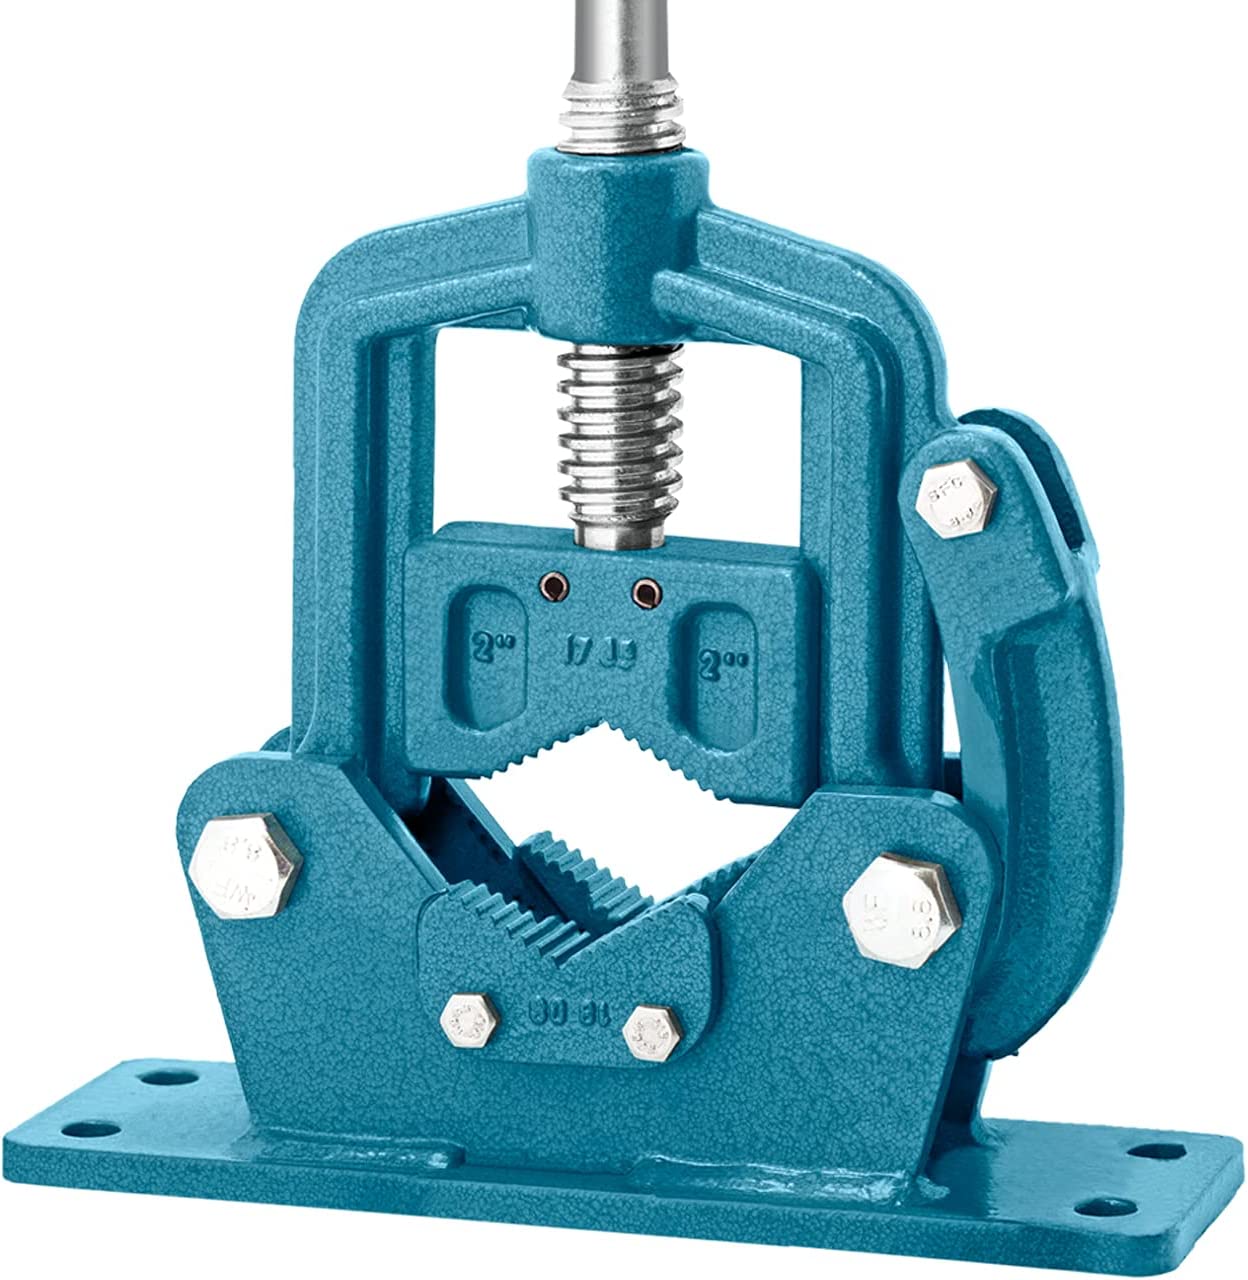 KANCA-PV-4 Fold-Out Pipe Vise, Strong Ductile Iron Bench Vise 4'' Capacity, Blue - $200